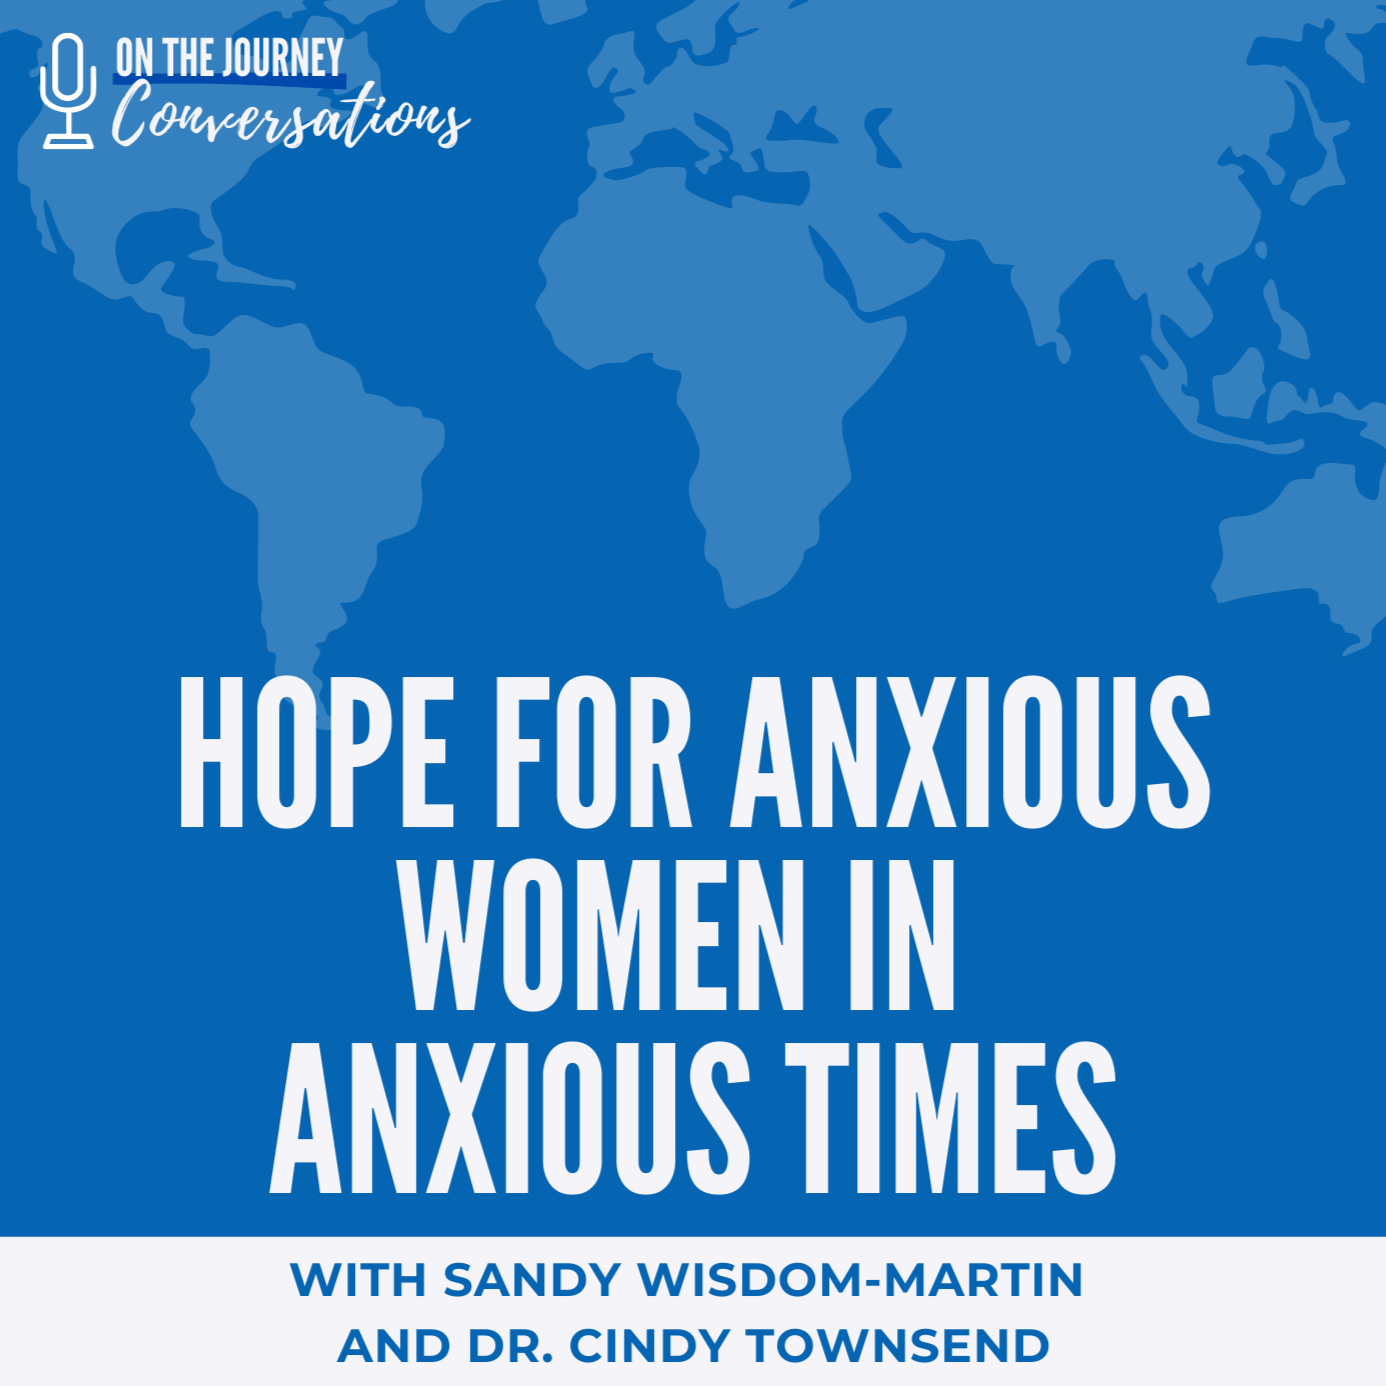 Hope for Anxious Women in Anxious Times